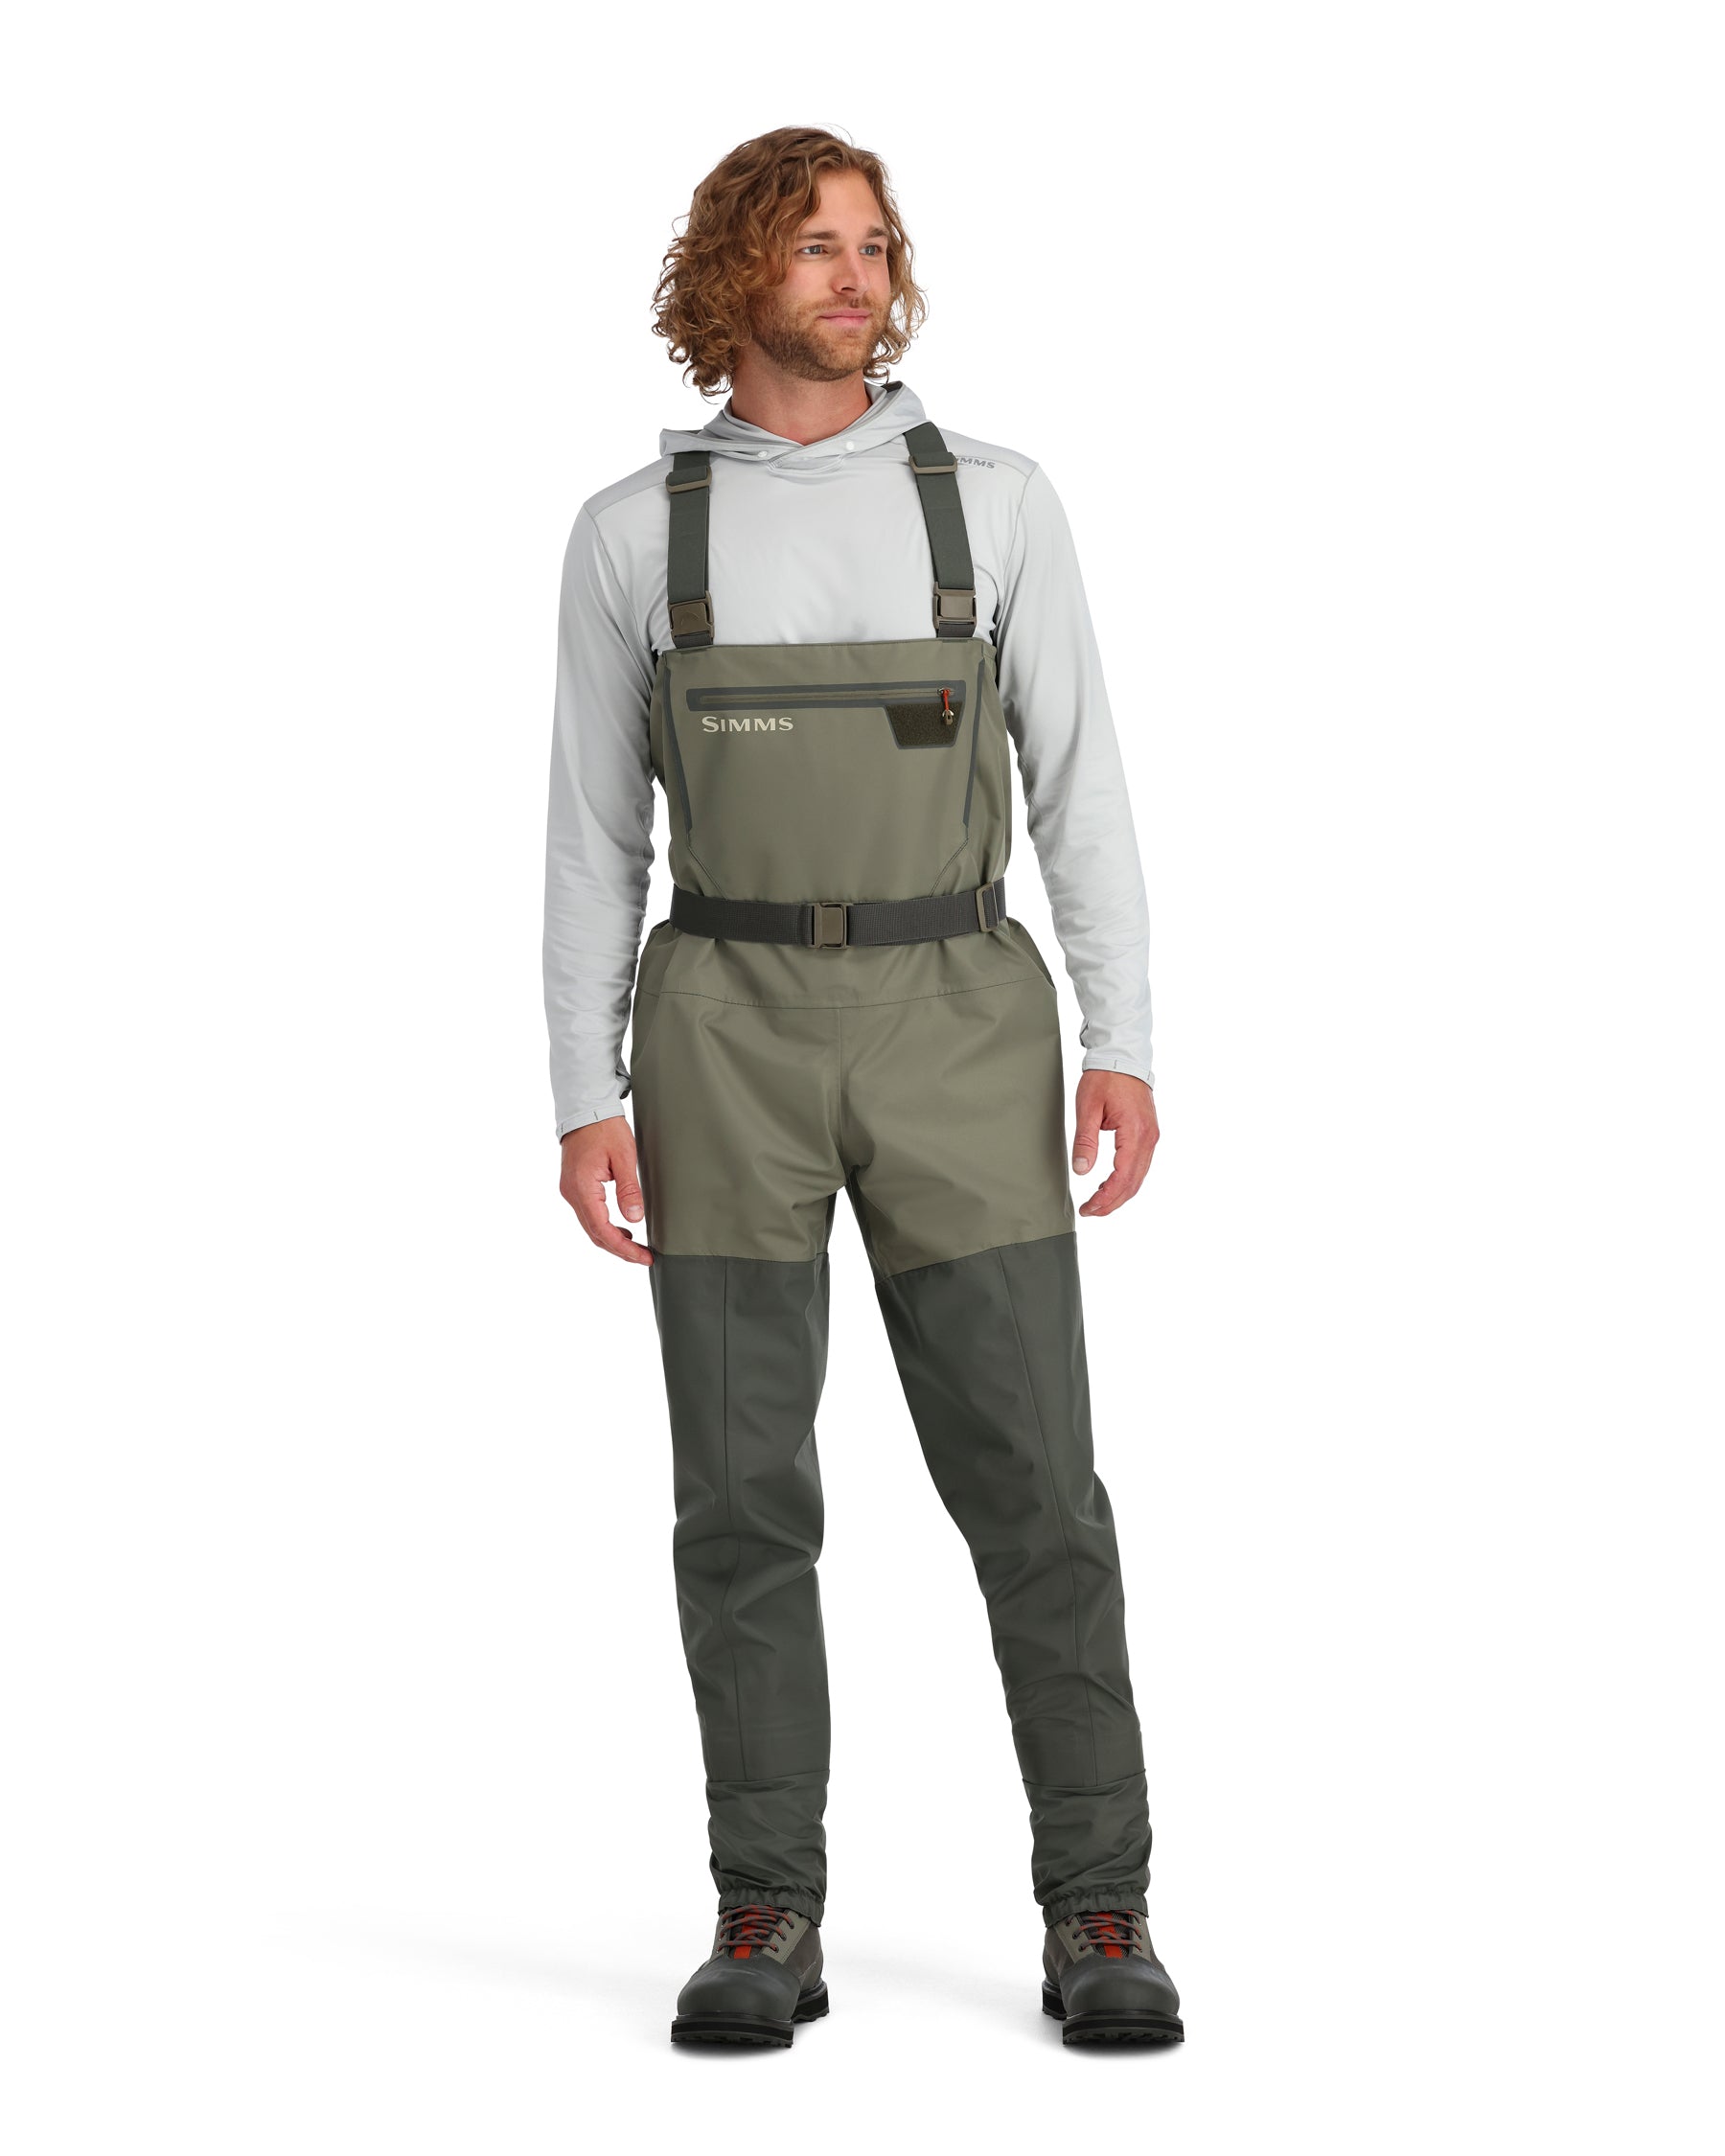 Are These Waders Worth the Price?, NEW Simms G4Z Waders 2024